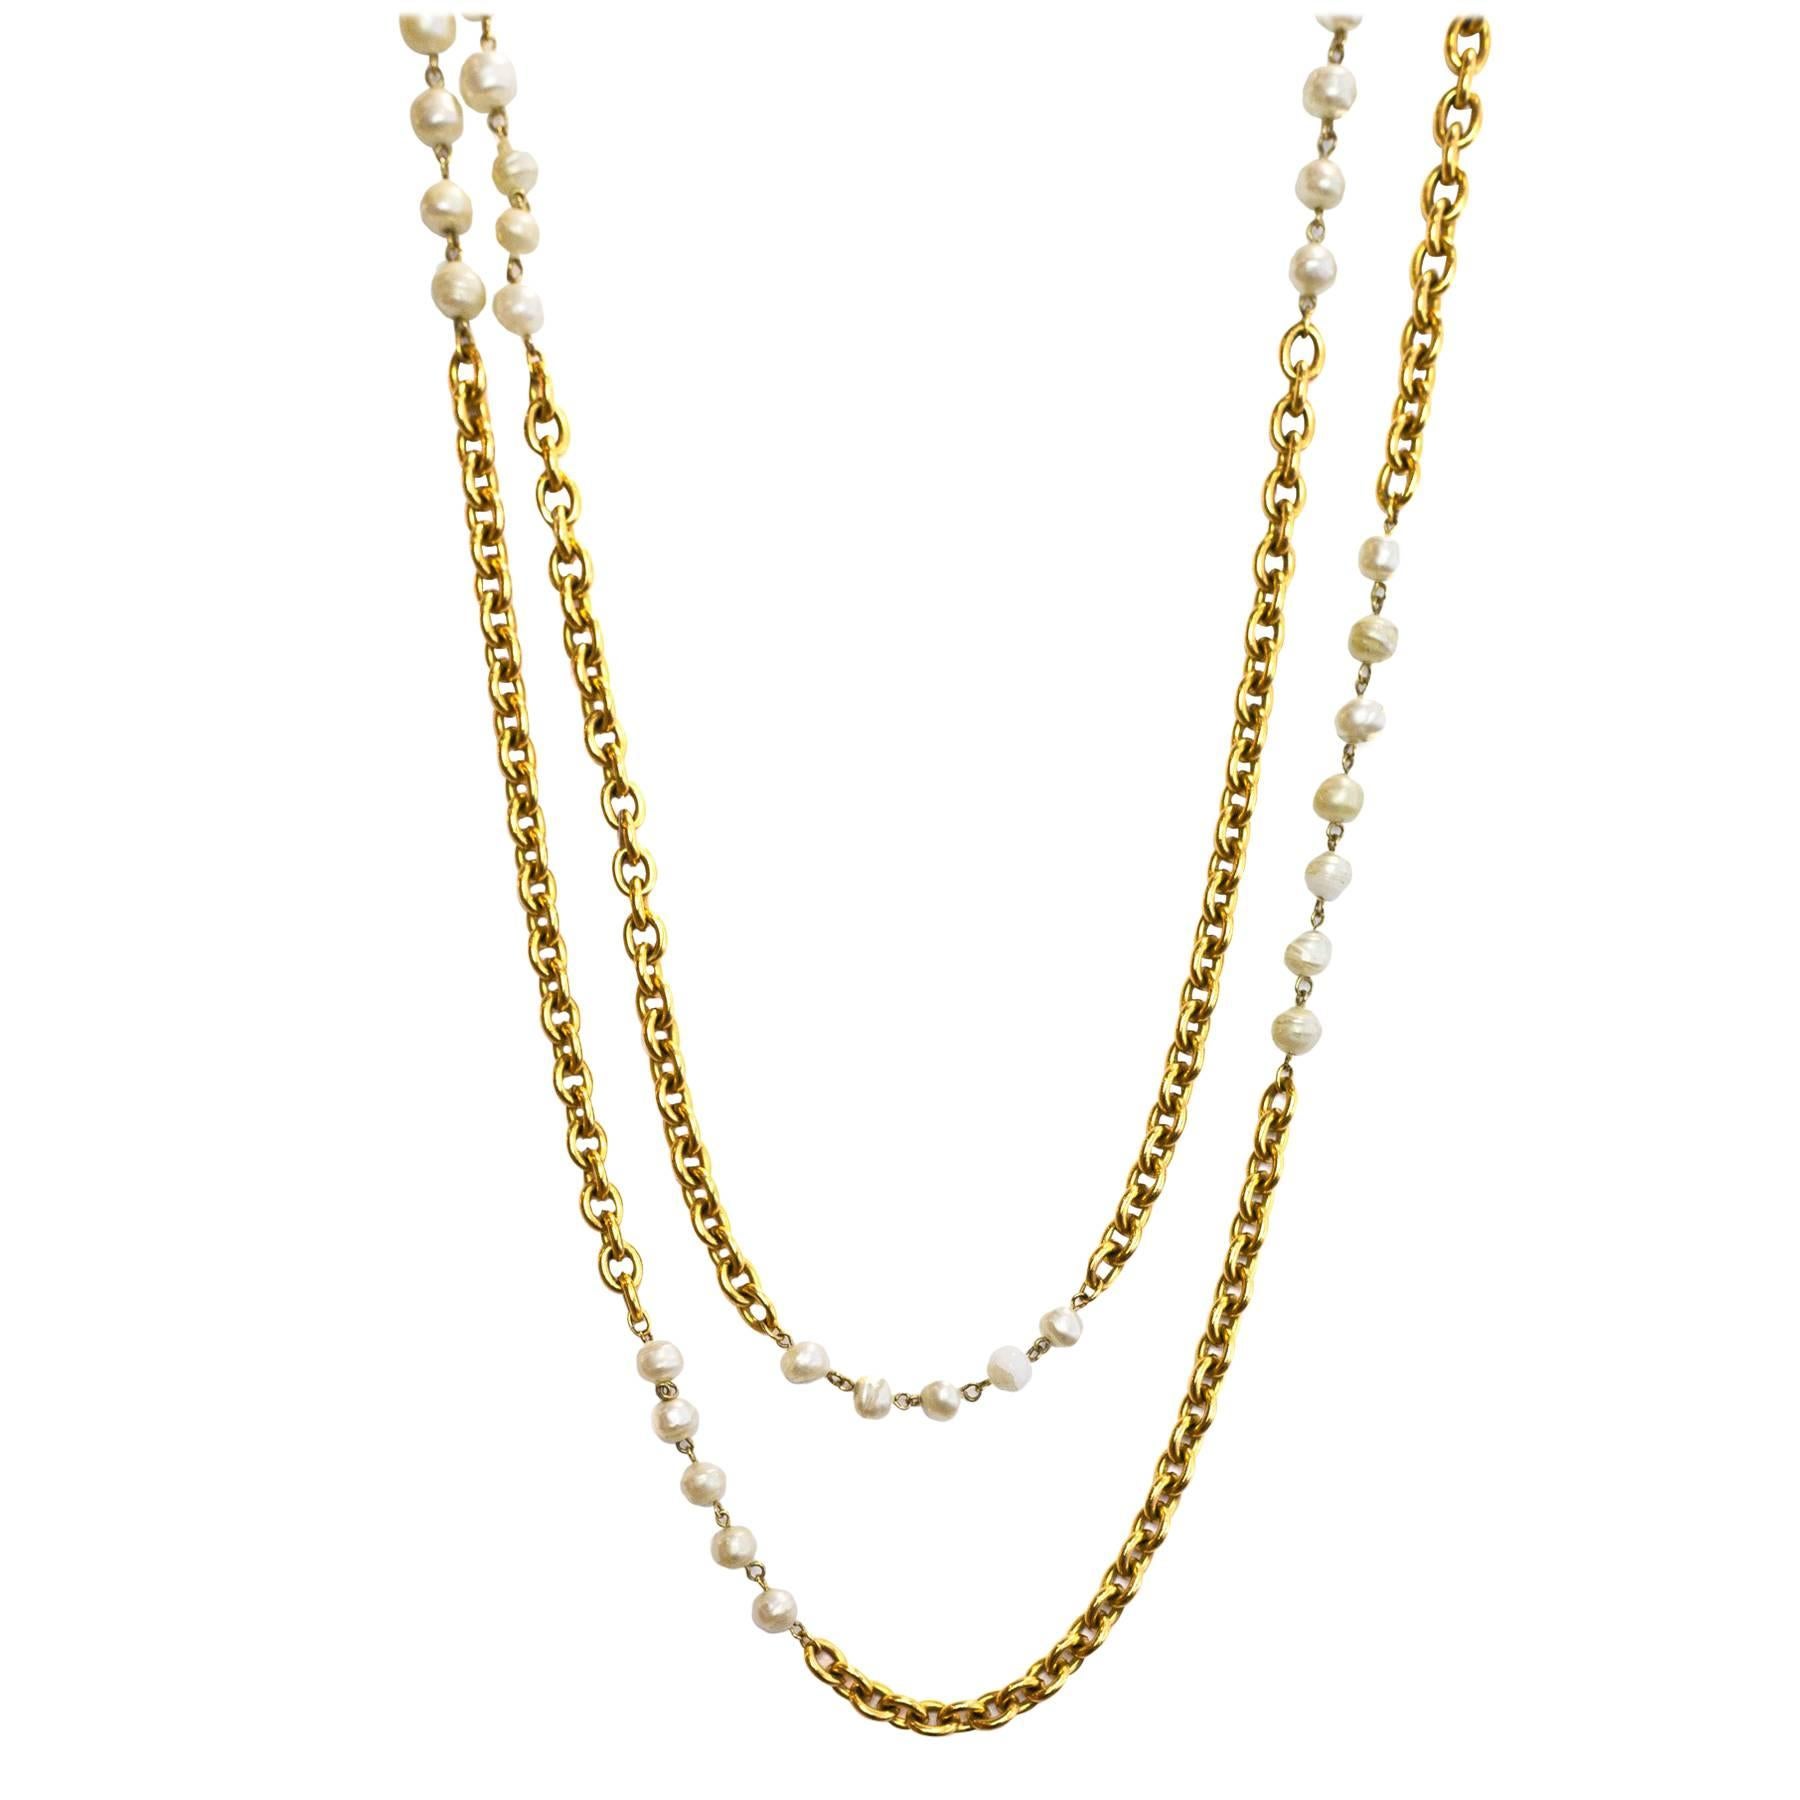 Chanel '90s Vintage Ivory Faux Pearl & Goldtone Extra Long Necklace